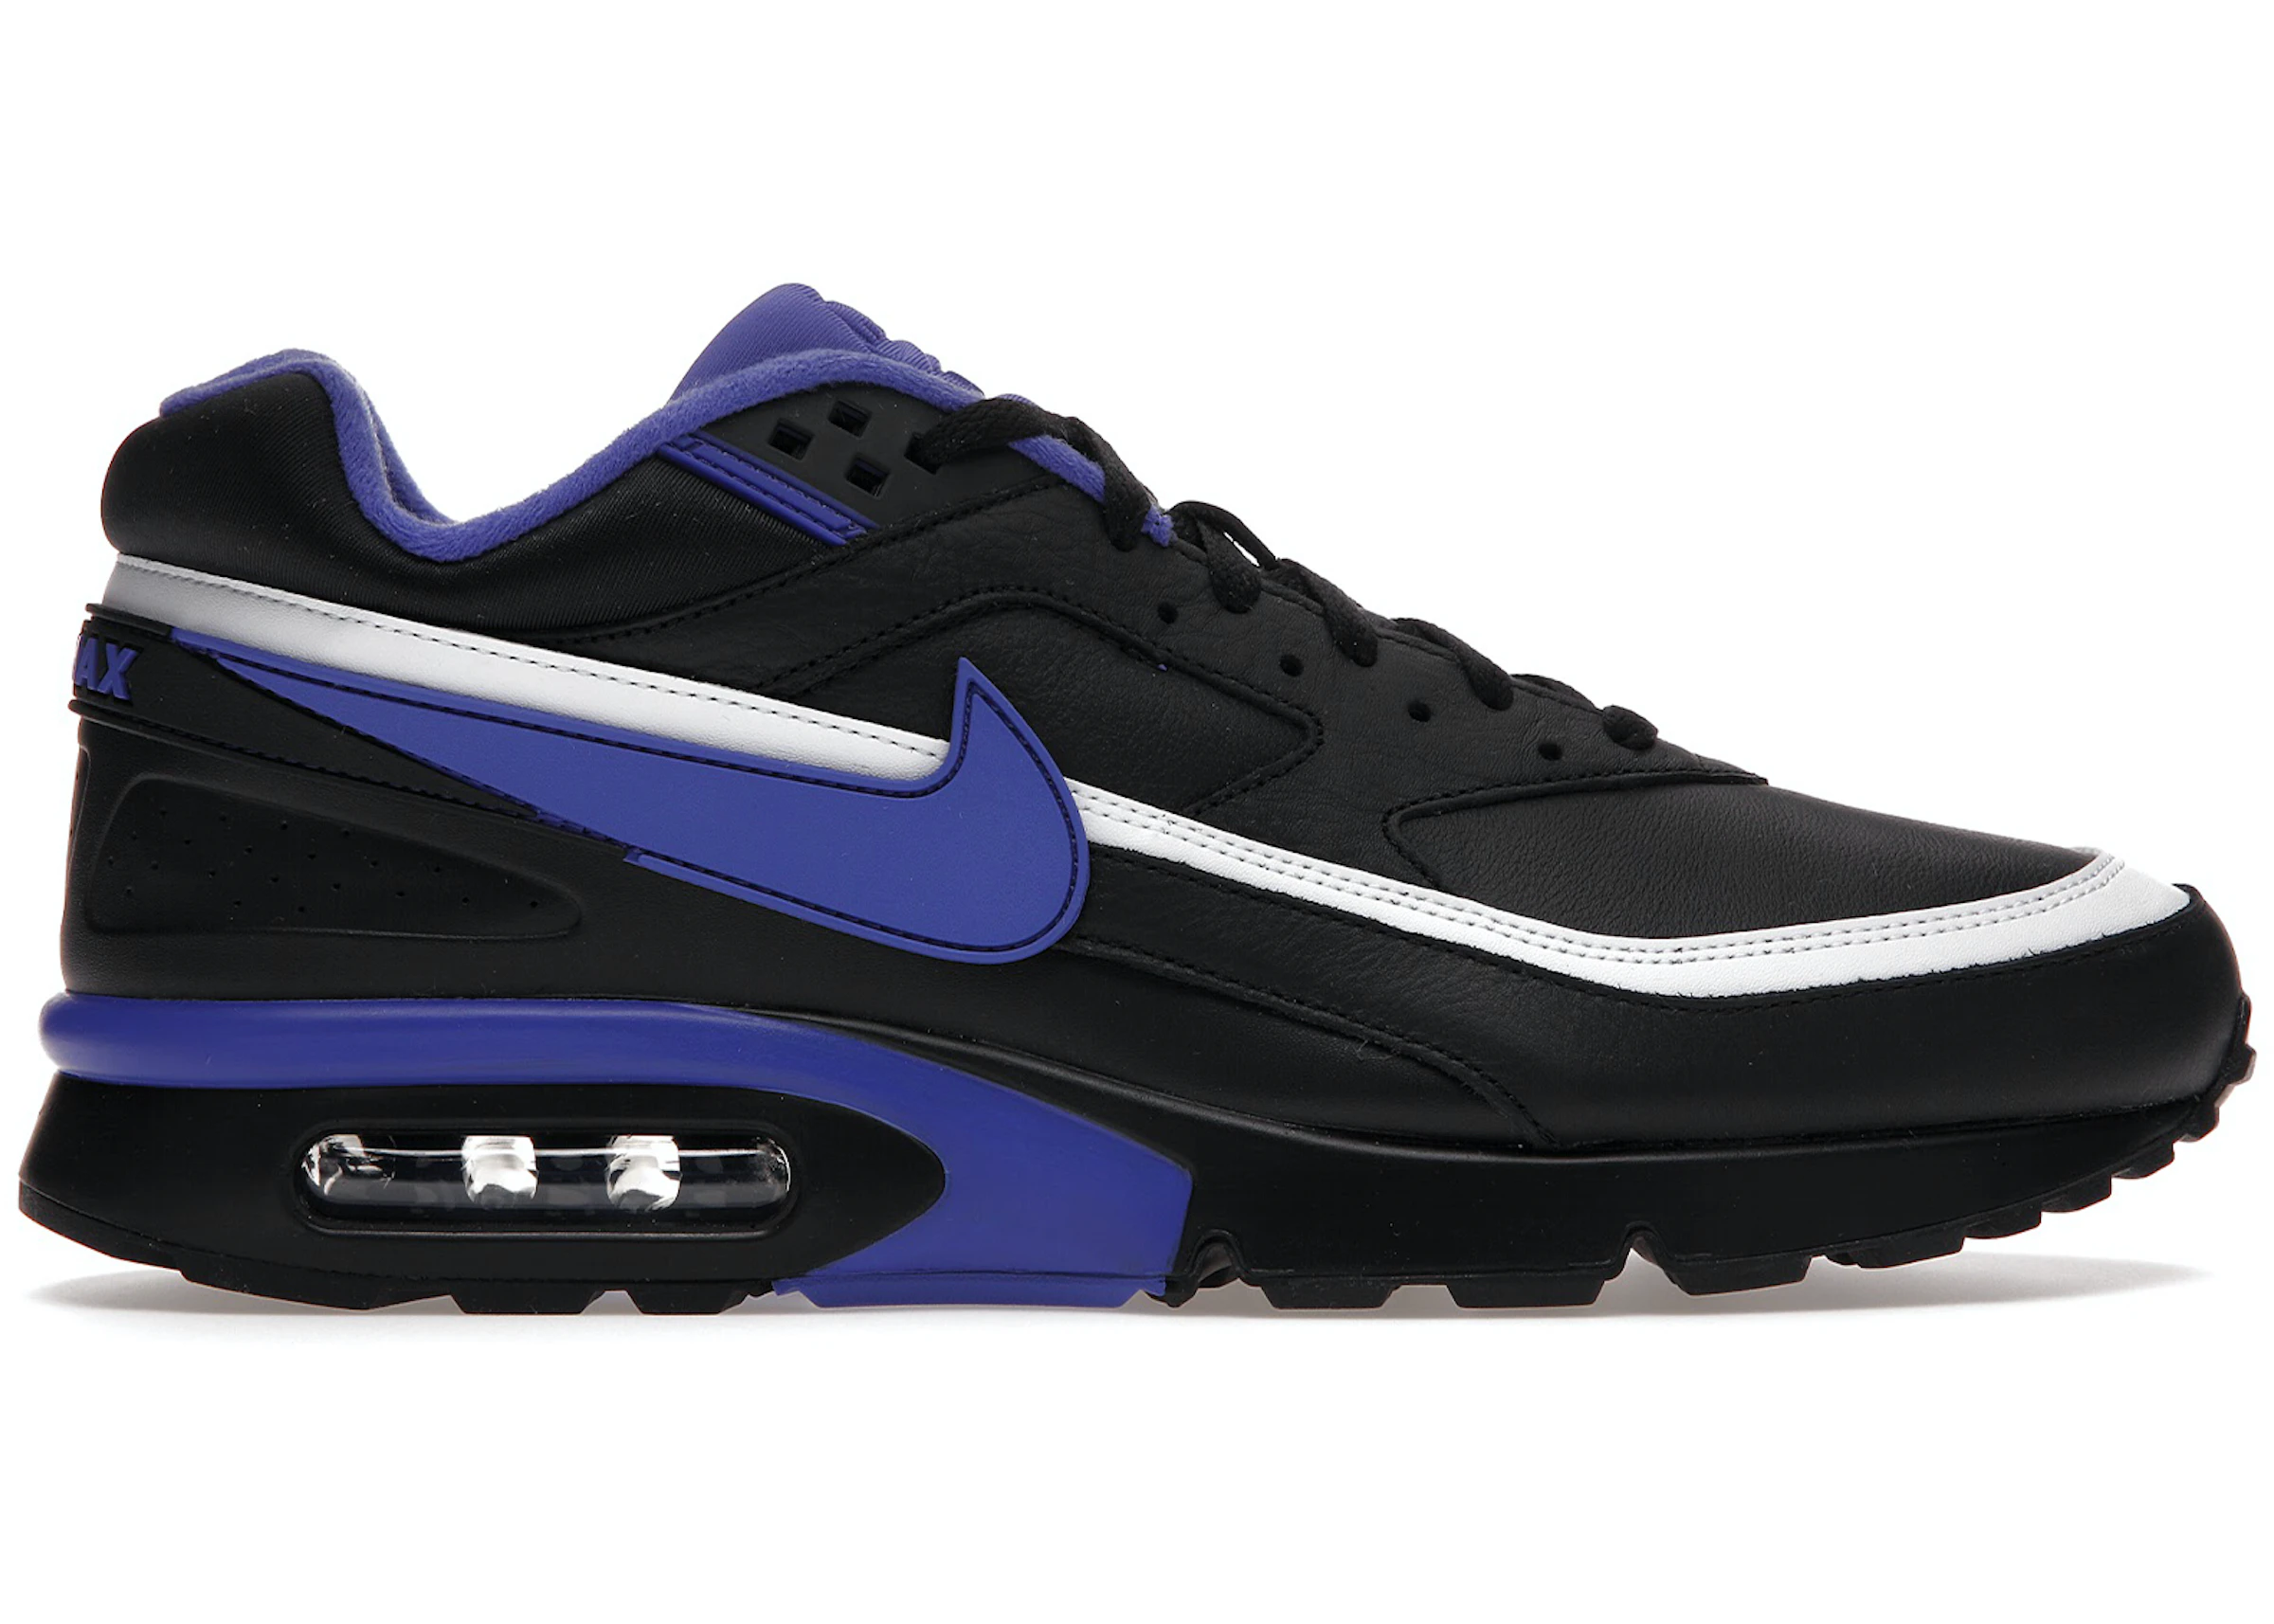 Air Max BW Black Persian Violet Leather - DM3047-001 - US